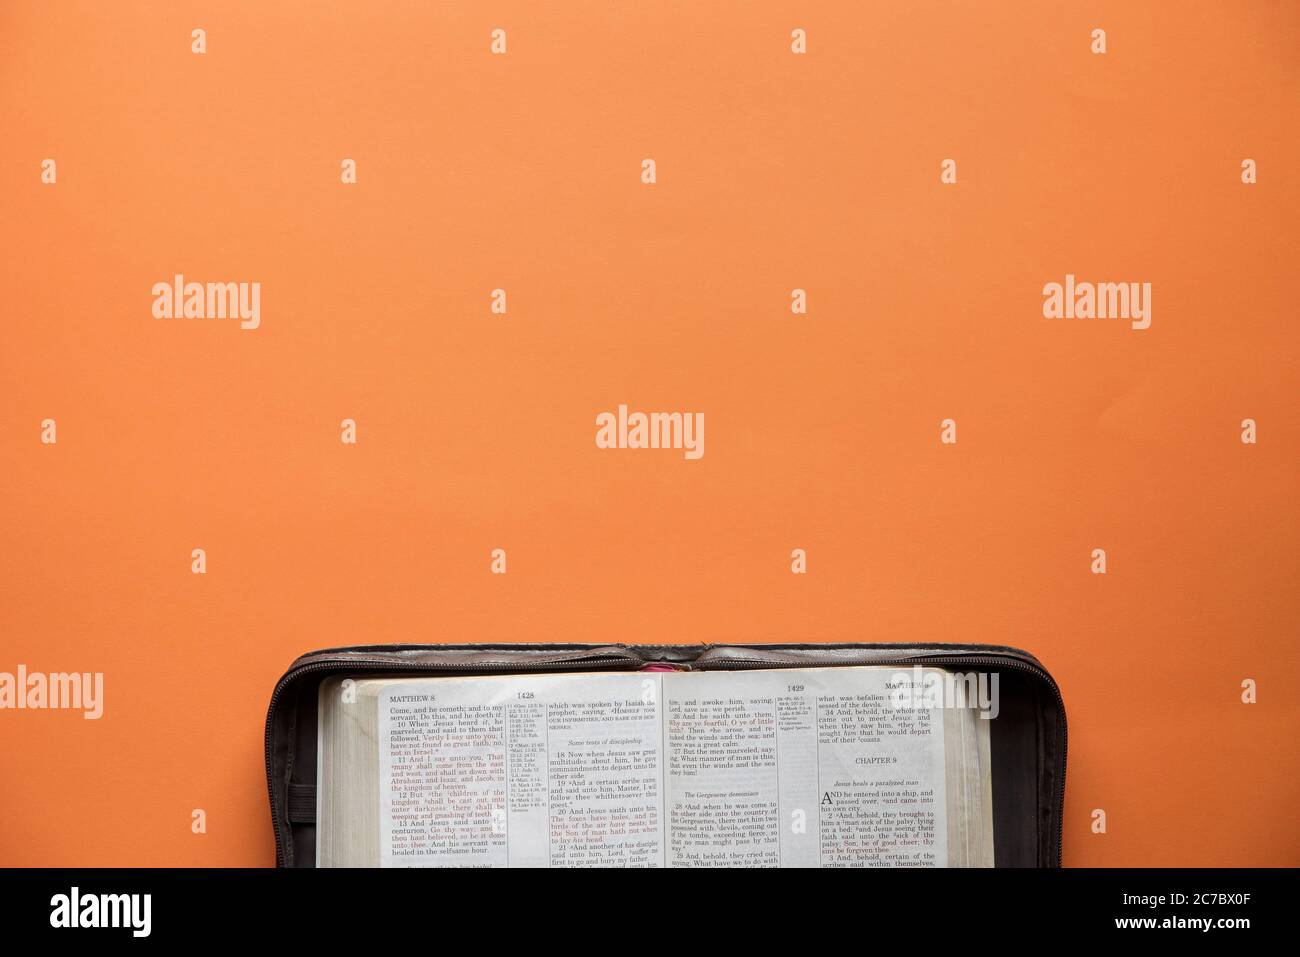 Overhead shot of an open book on an orange surface Stock Photo